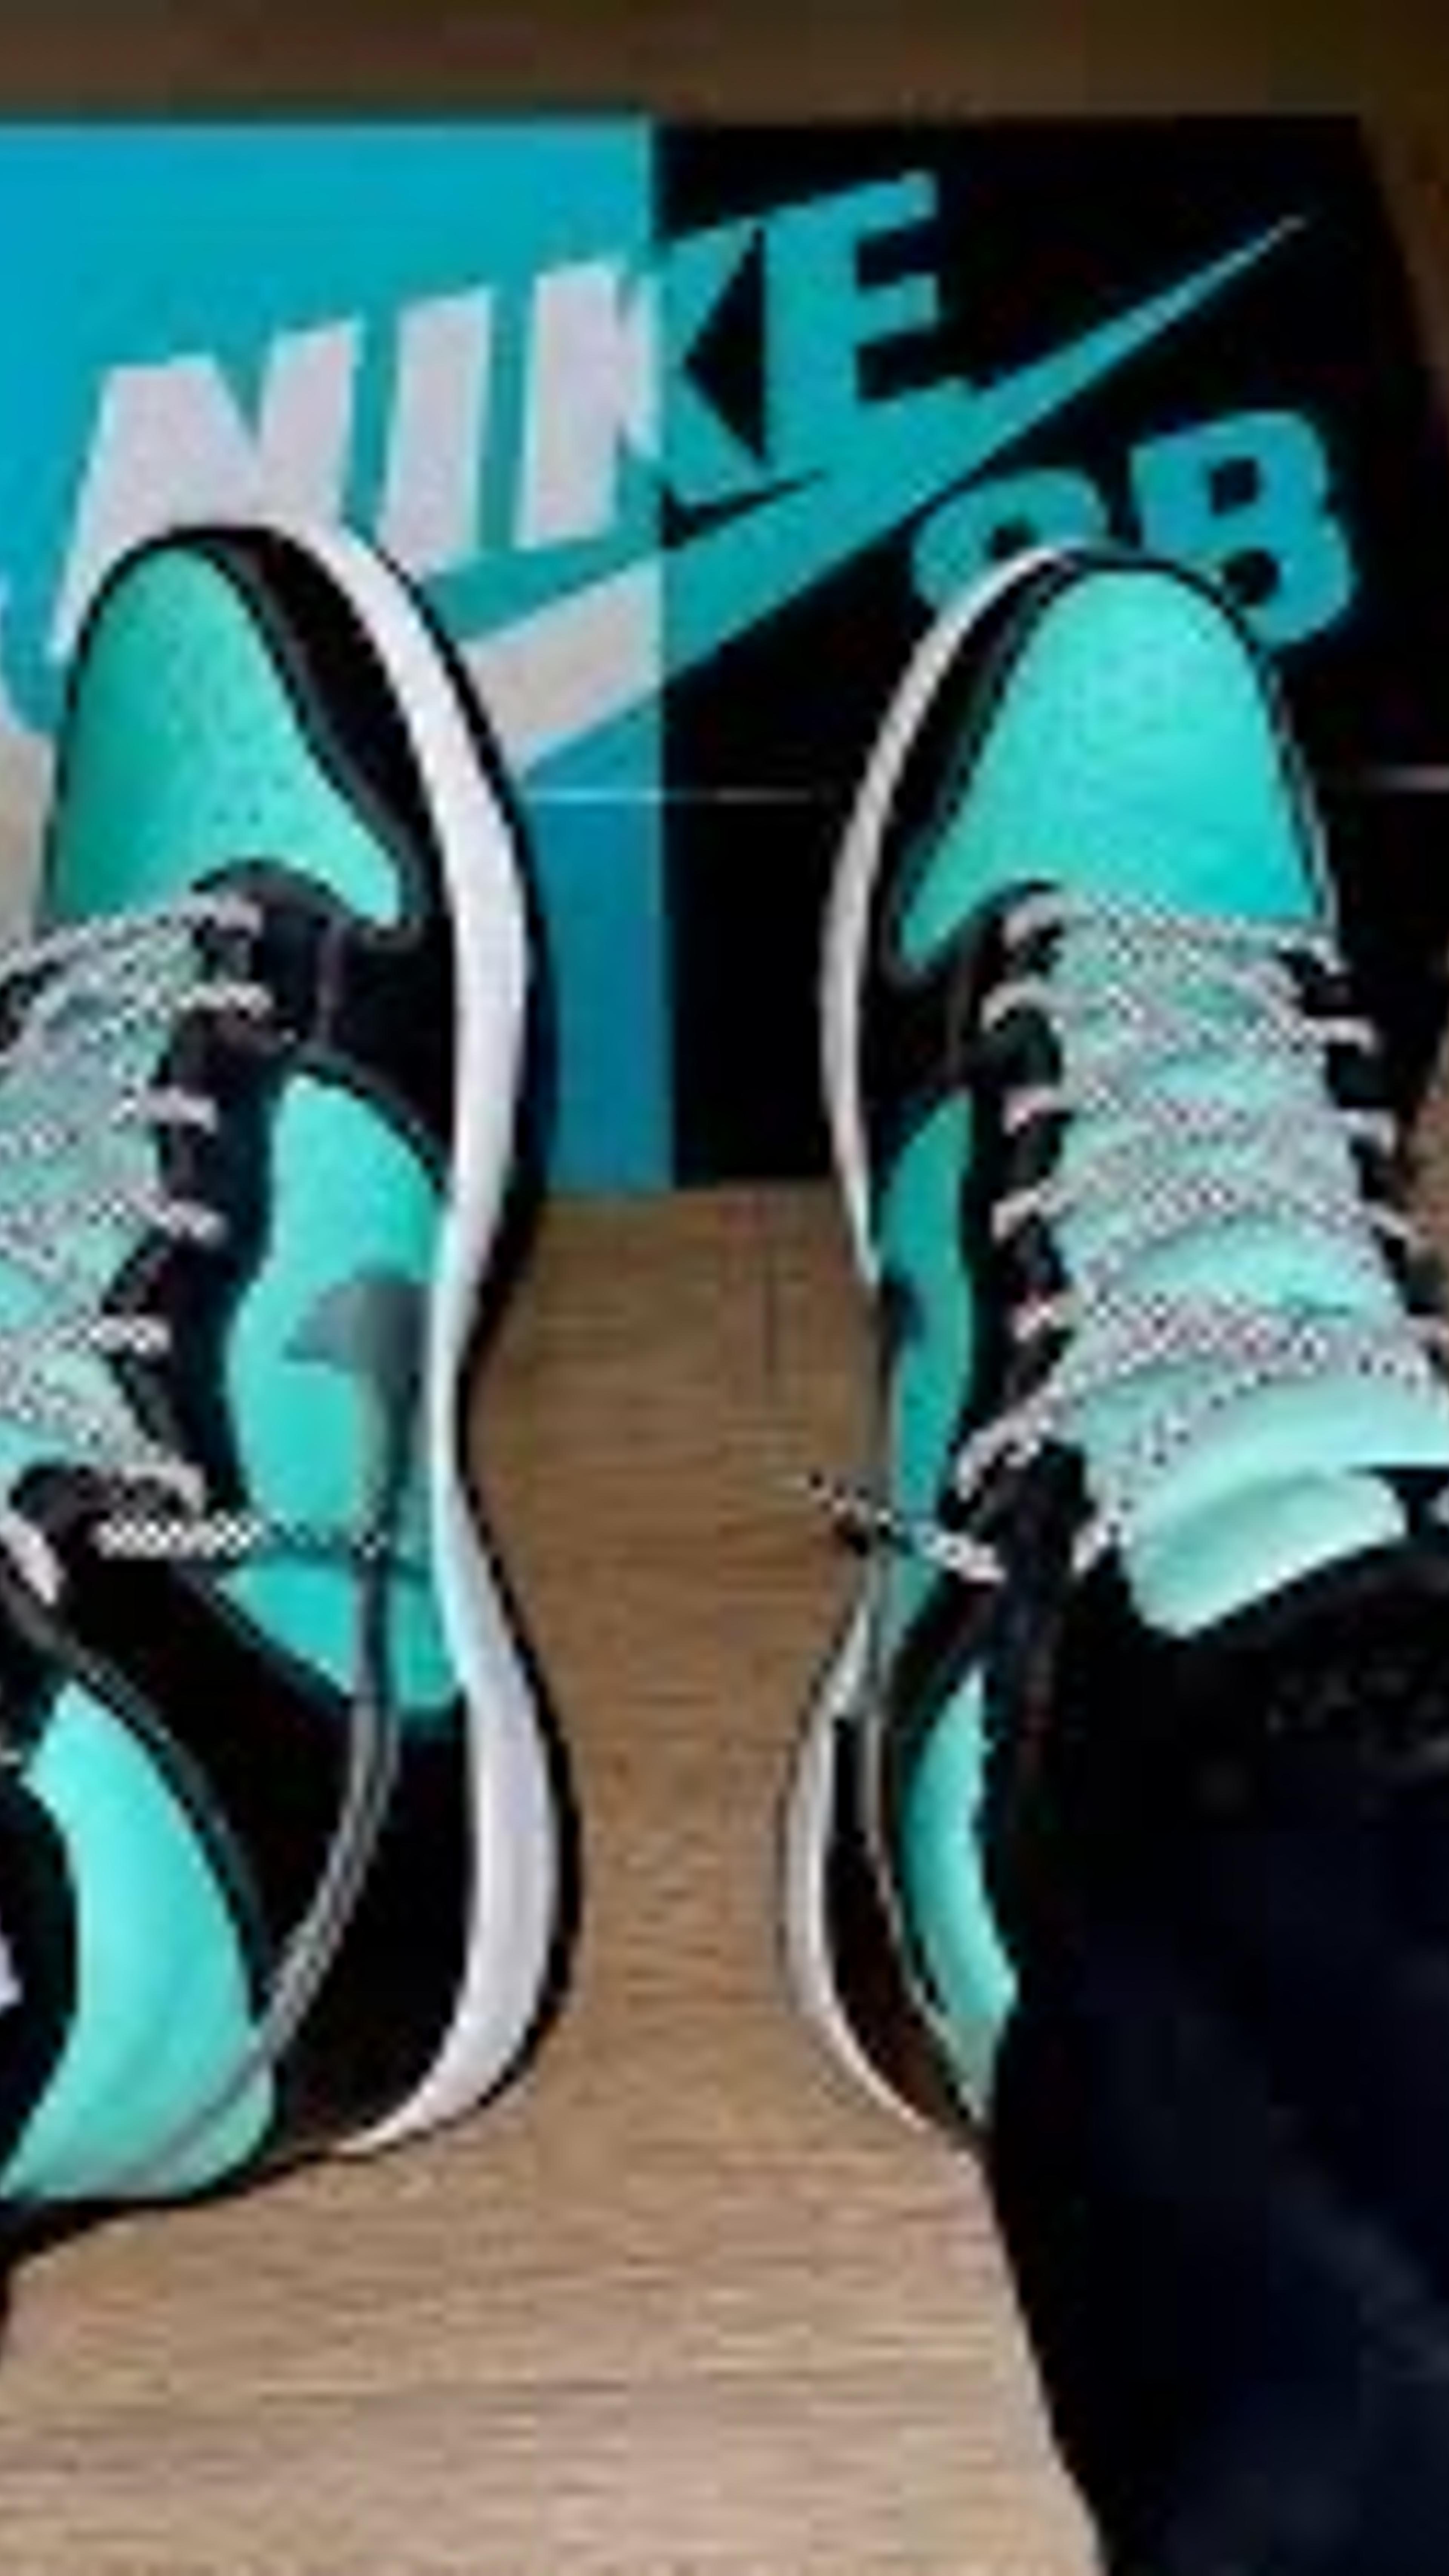 Preview image for the show titled "Mys Wheel DS SBDUNK HIGH TIFFANY DIAMOND Choice sz 9/10/11/12/13" at Tomorrow @ 12:10 AM